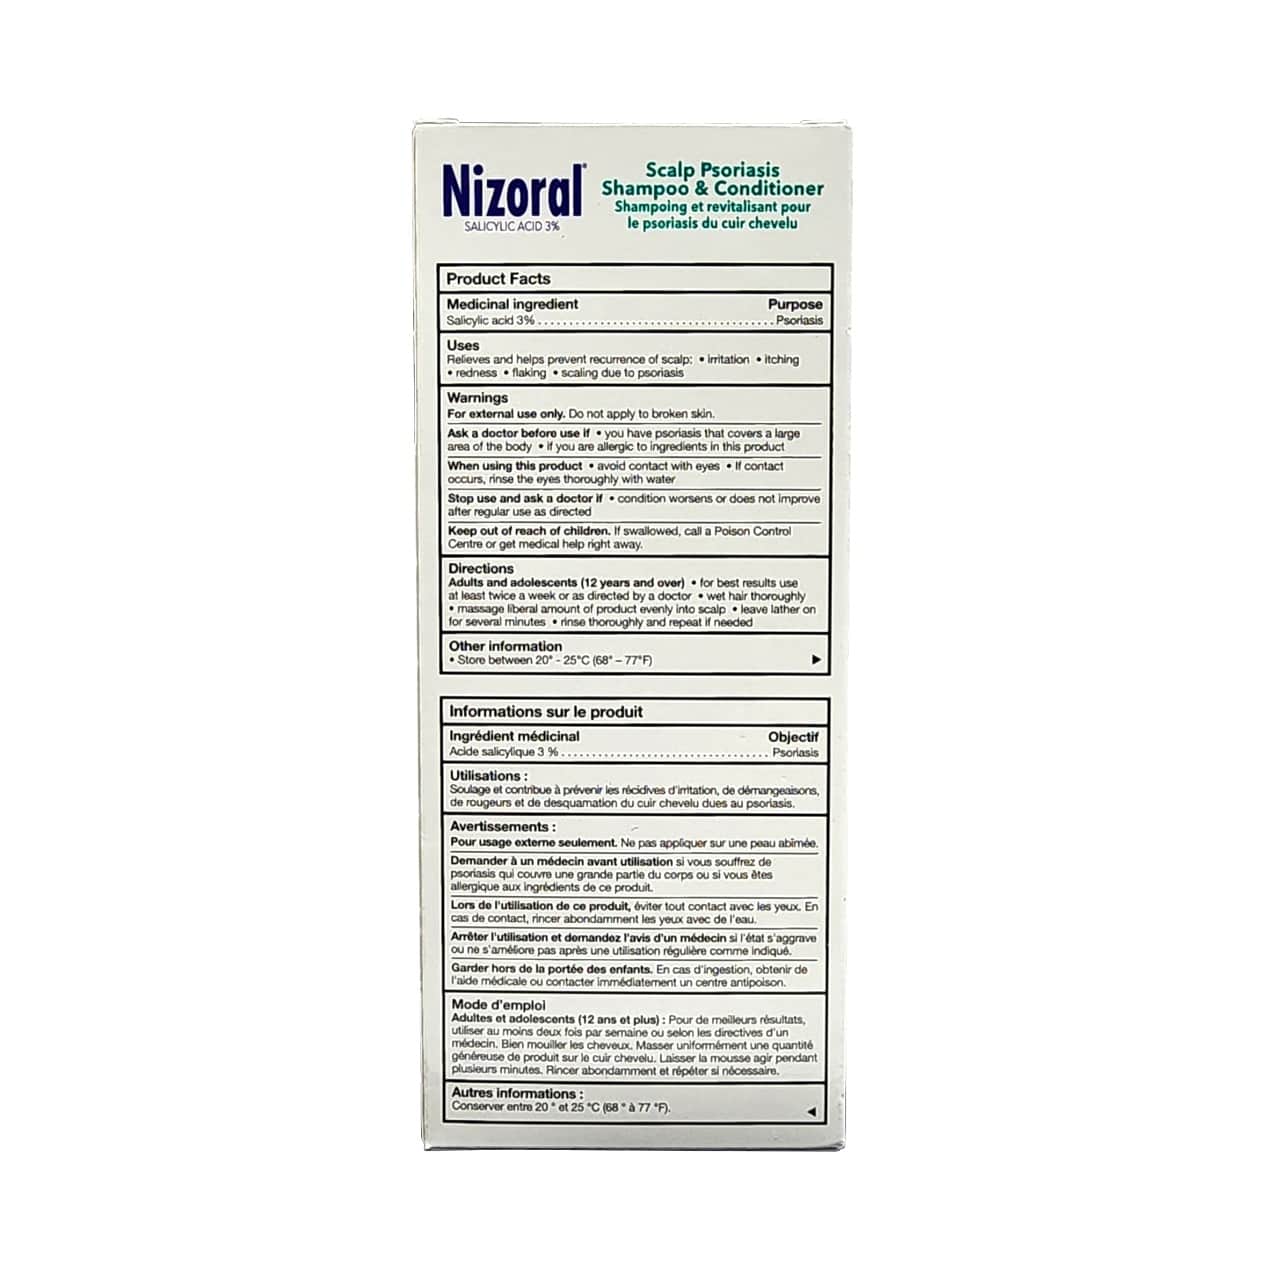 Ingredients, uses, warnings, directions for Nizoral Scalp Psoriasis Shampoo (200 mL)